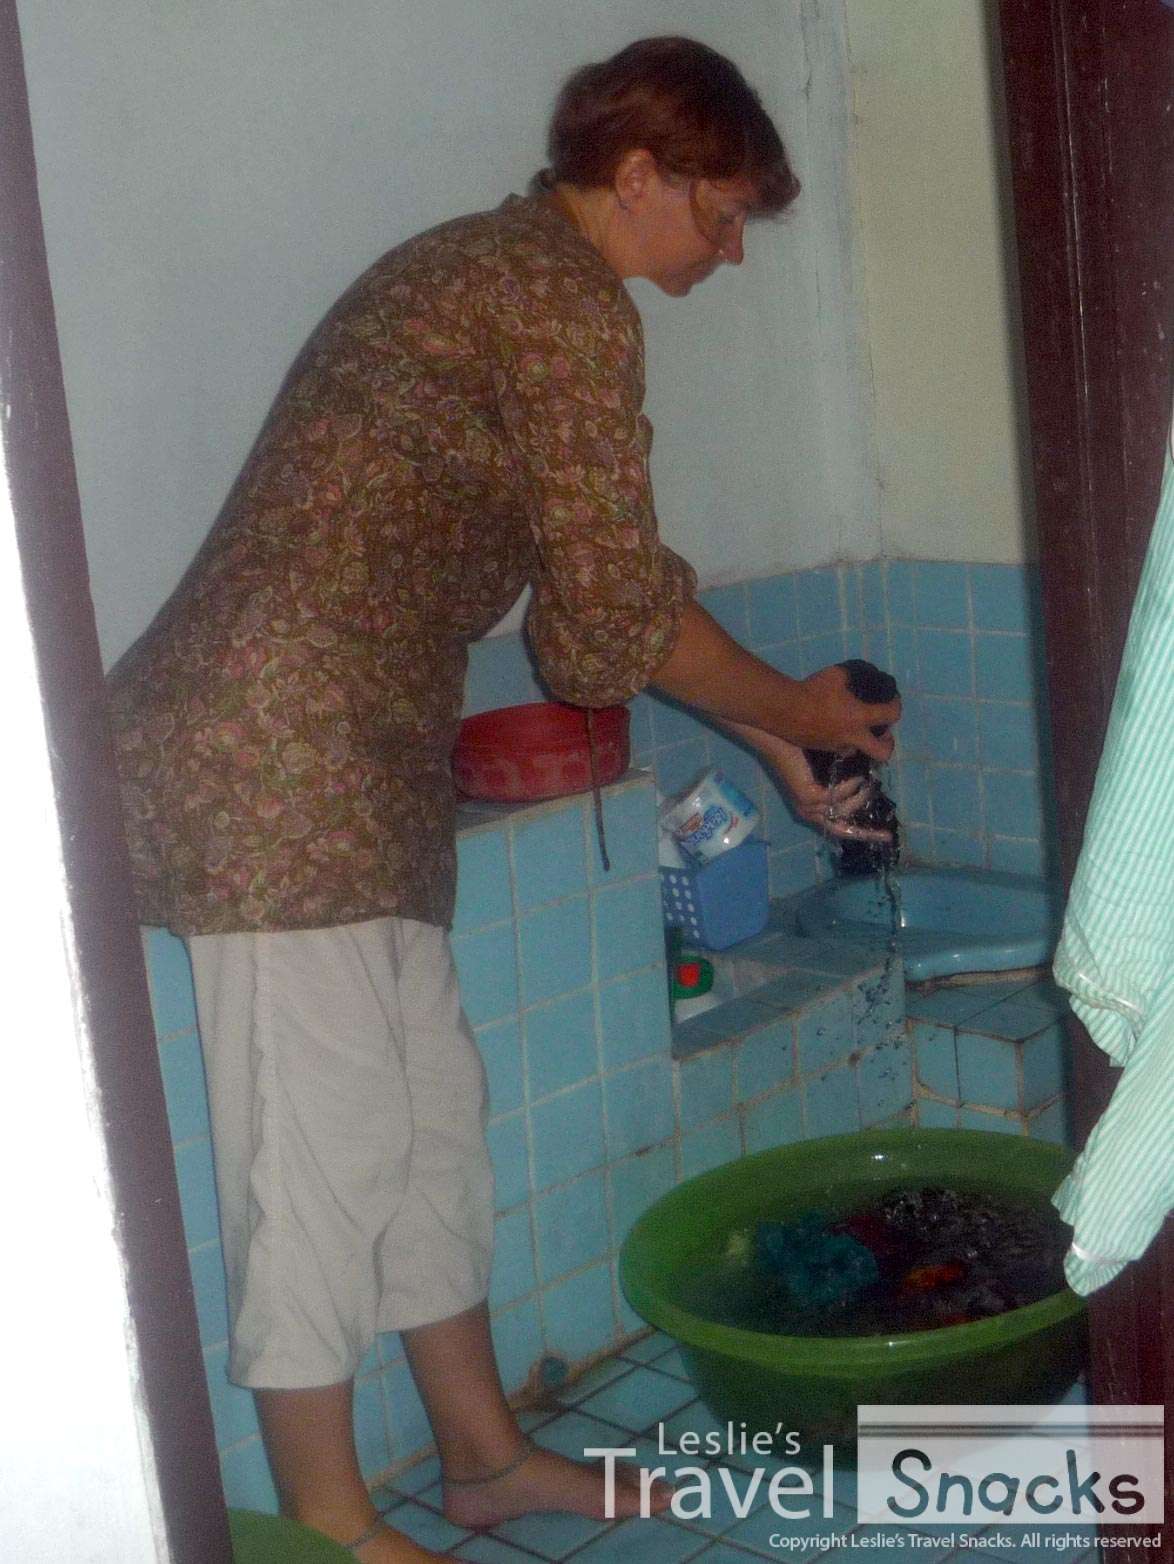 Doing laundry at my friend's house in Thailand.